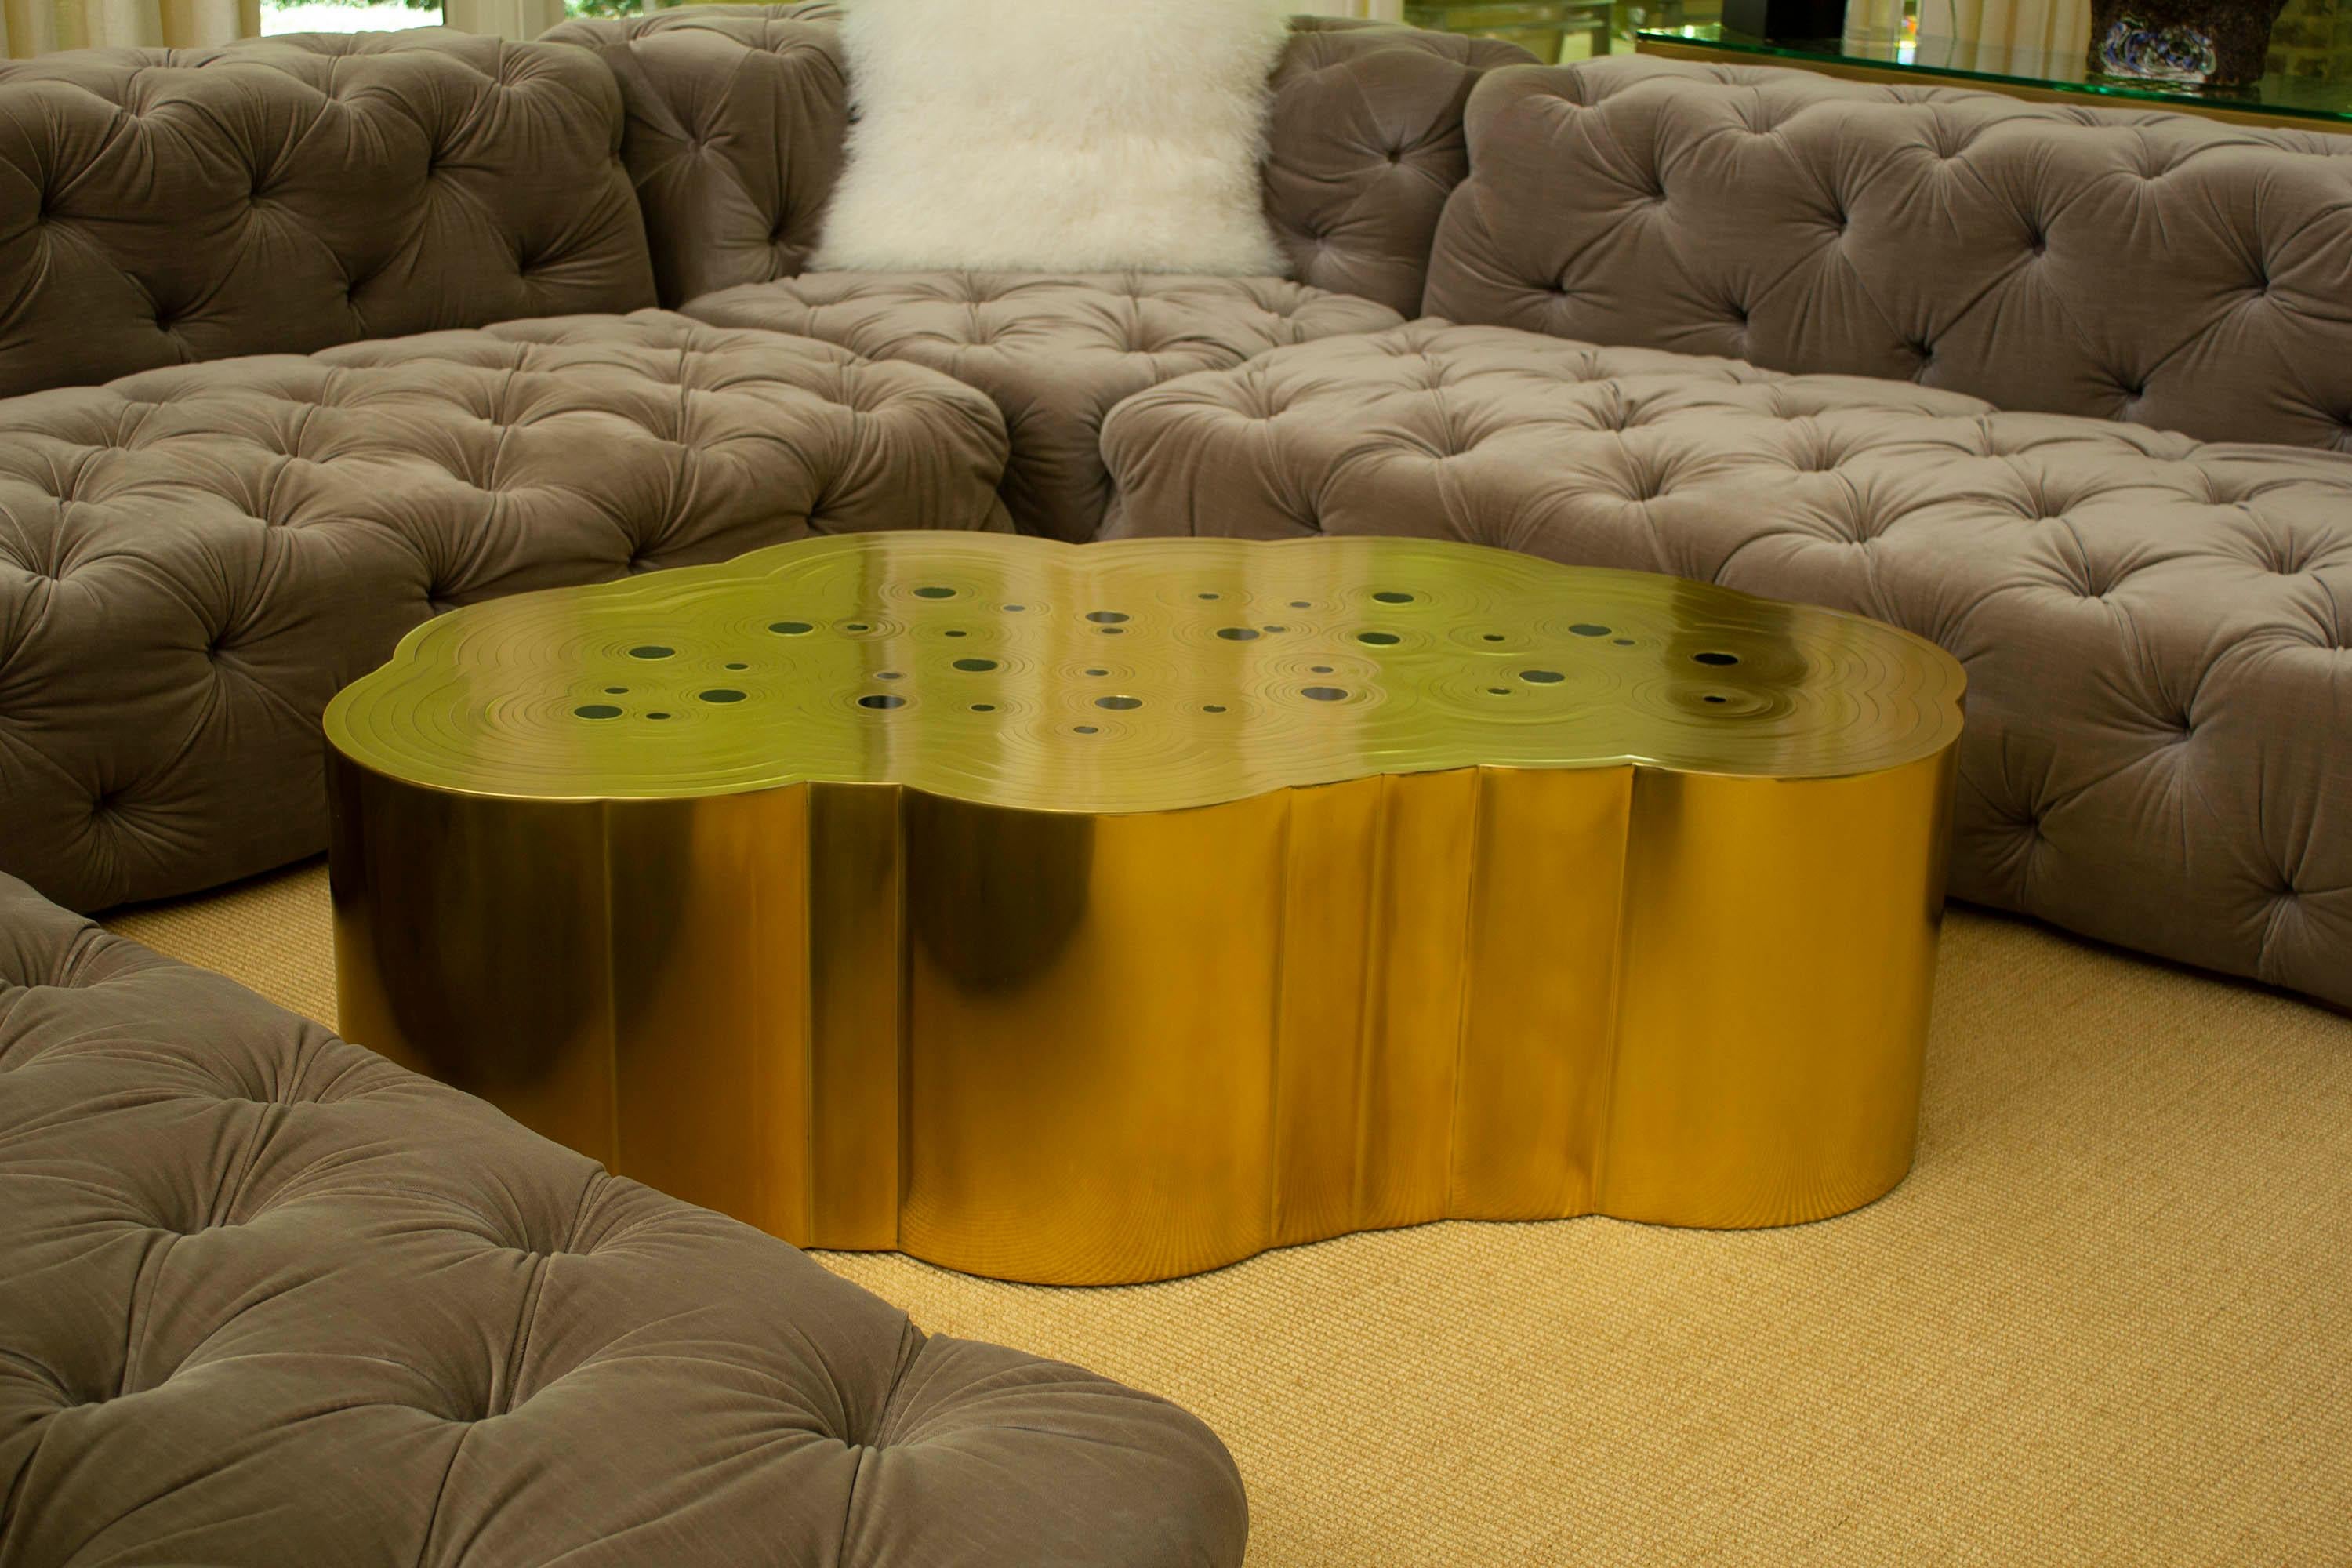 American Coffee Table Cloud Shaped by Erwan Boulloud 'Rosanna' in Solid Brass and Onyx